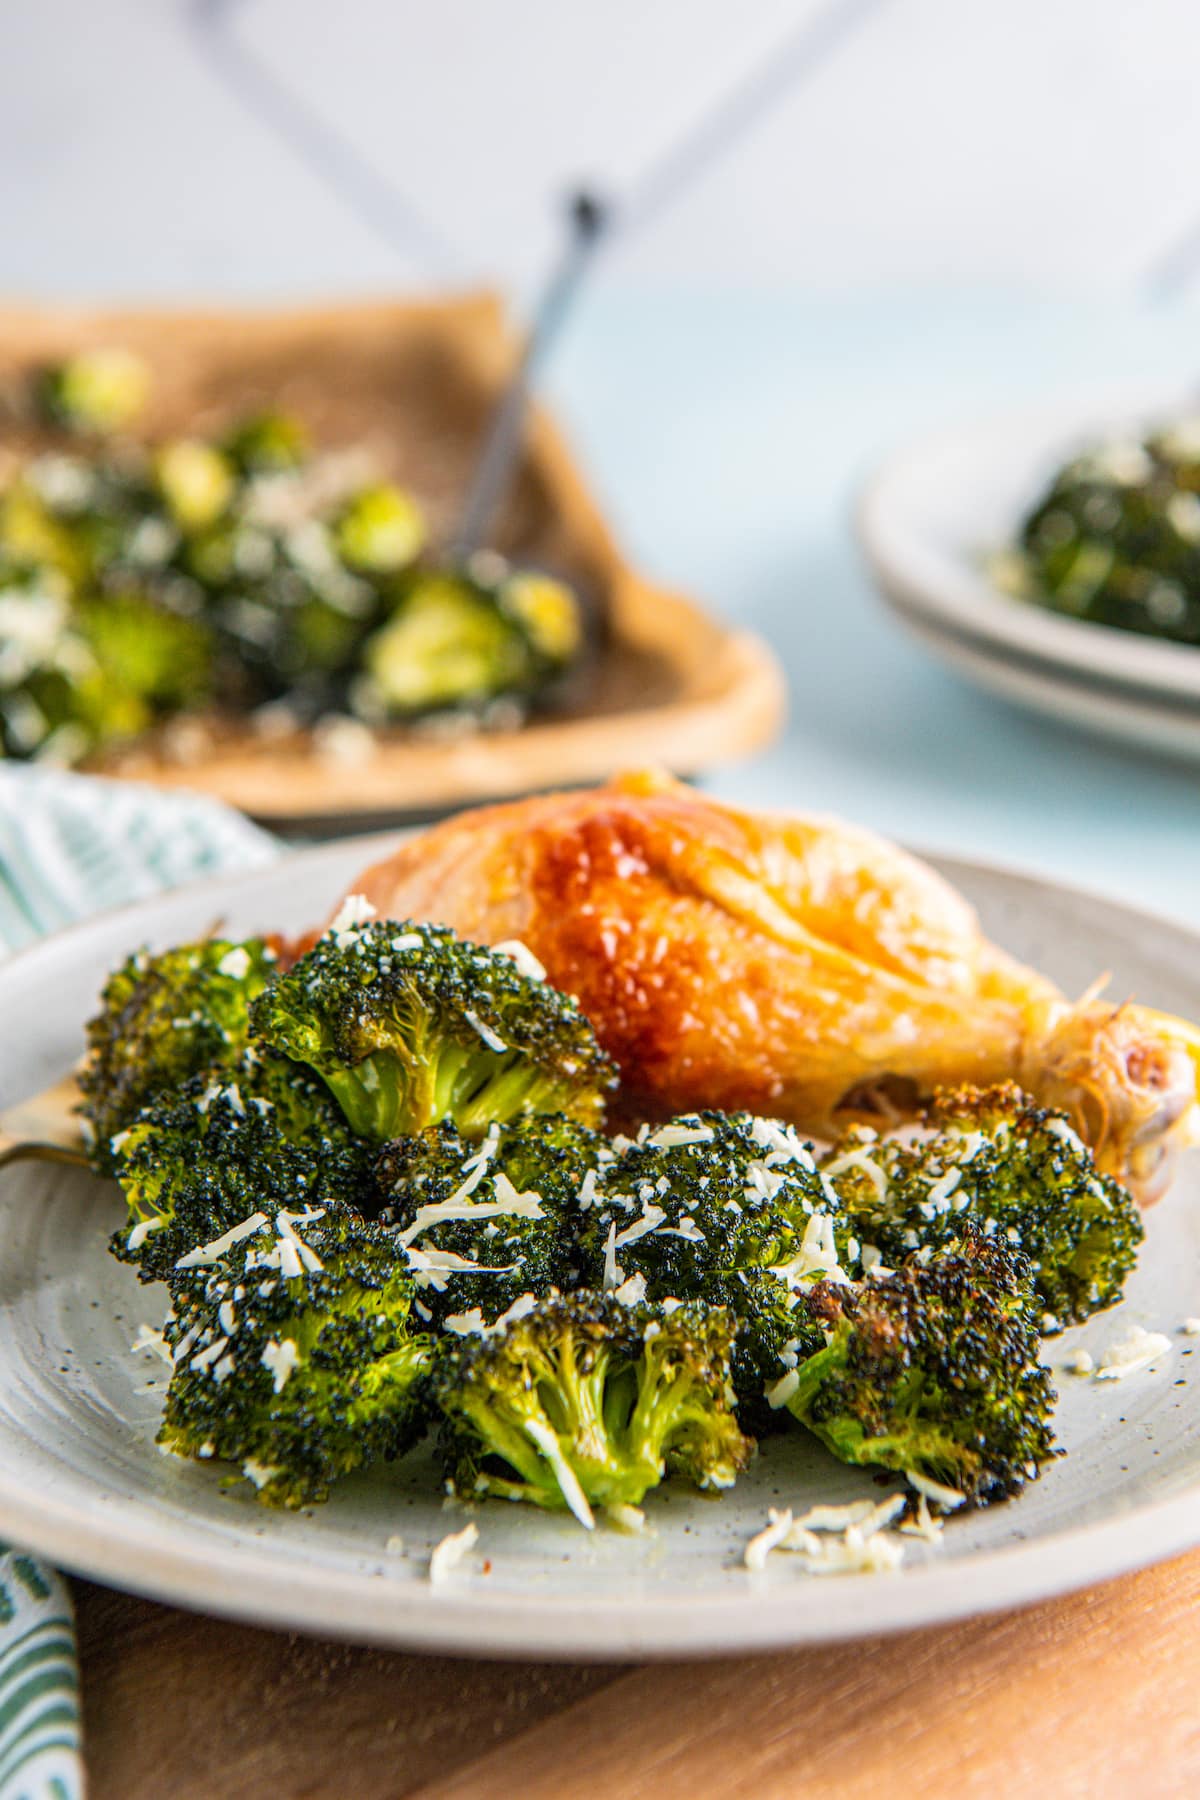 Roasted broccoli and parmesan cheese.